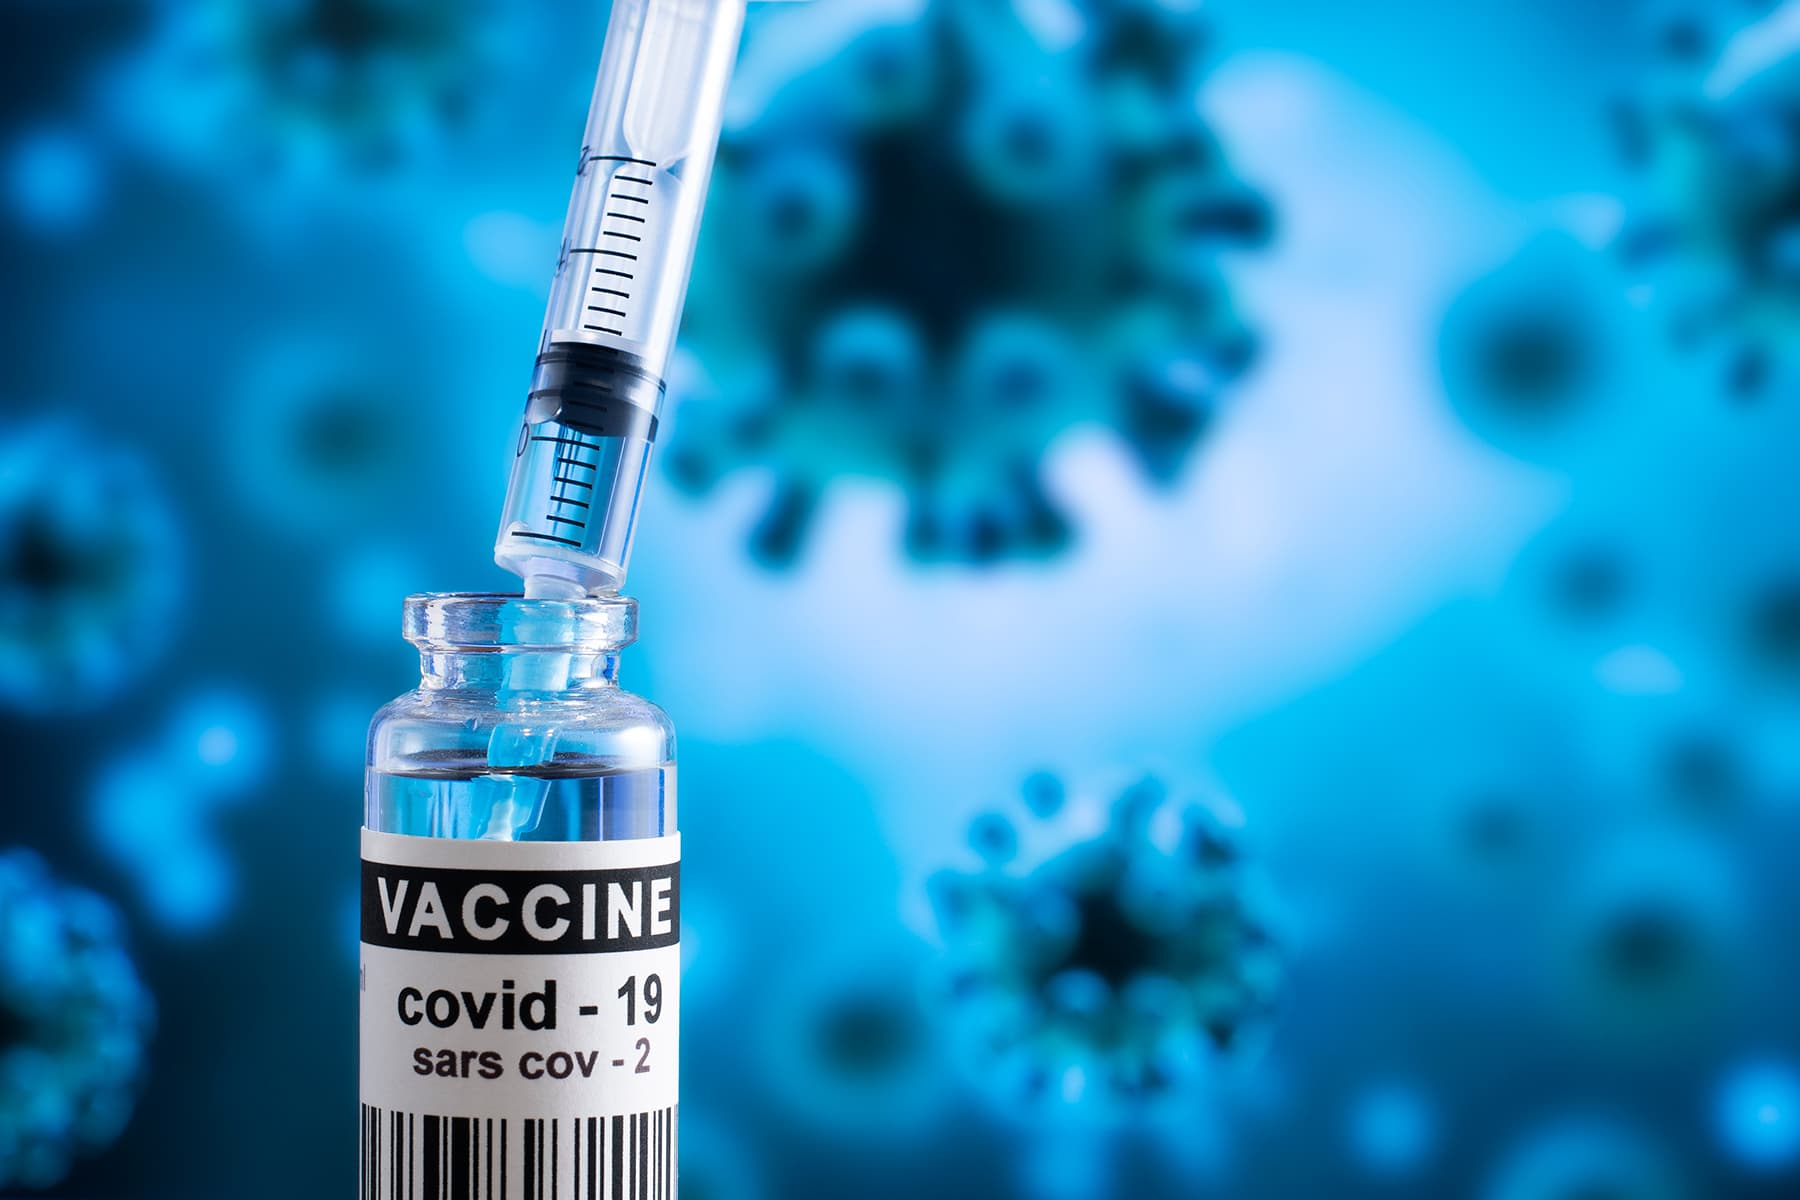 CDC Approves New COVID Vaccine; Shots Available This Week